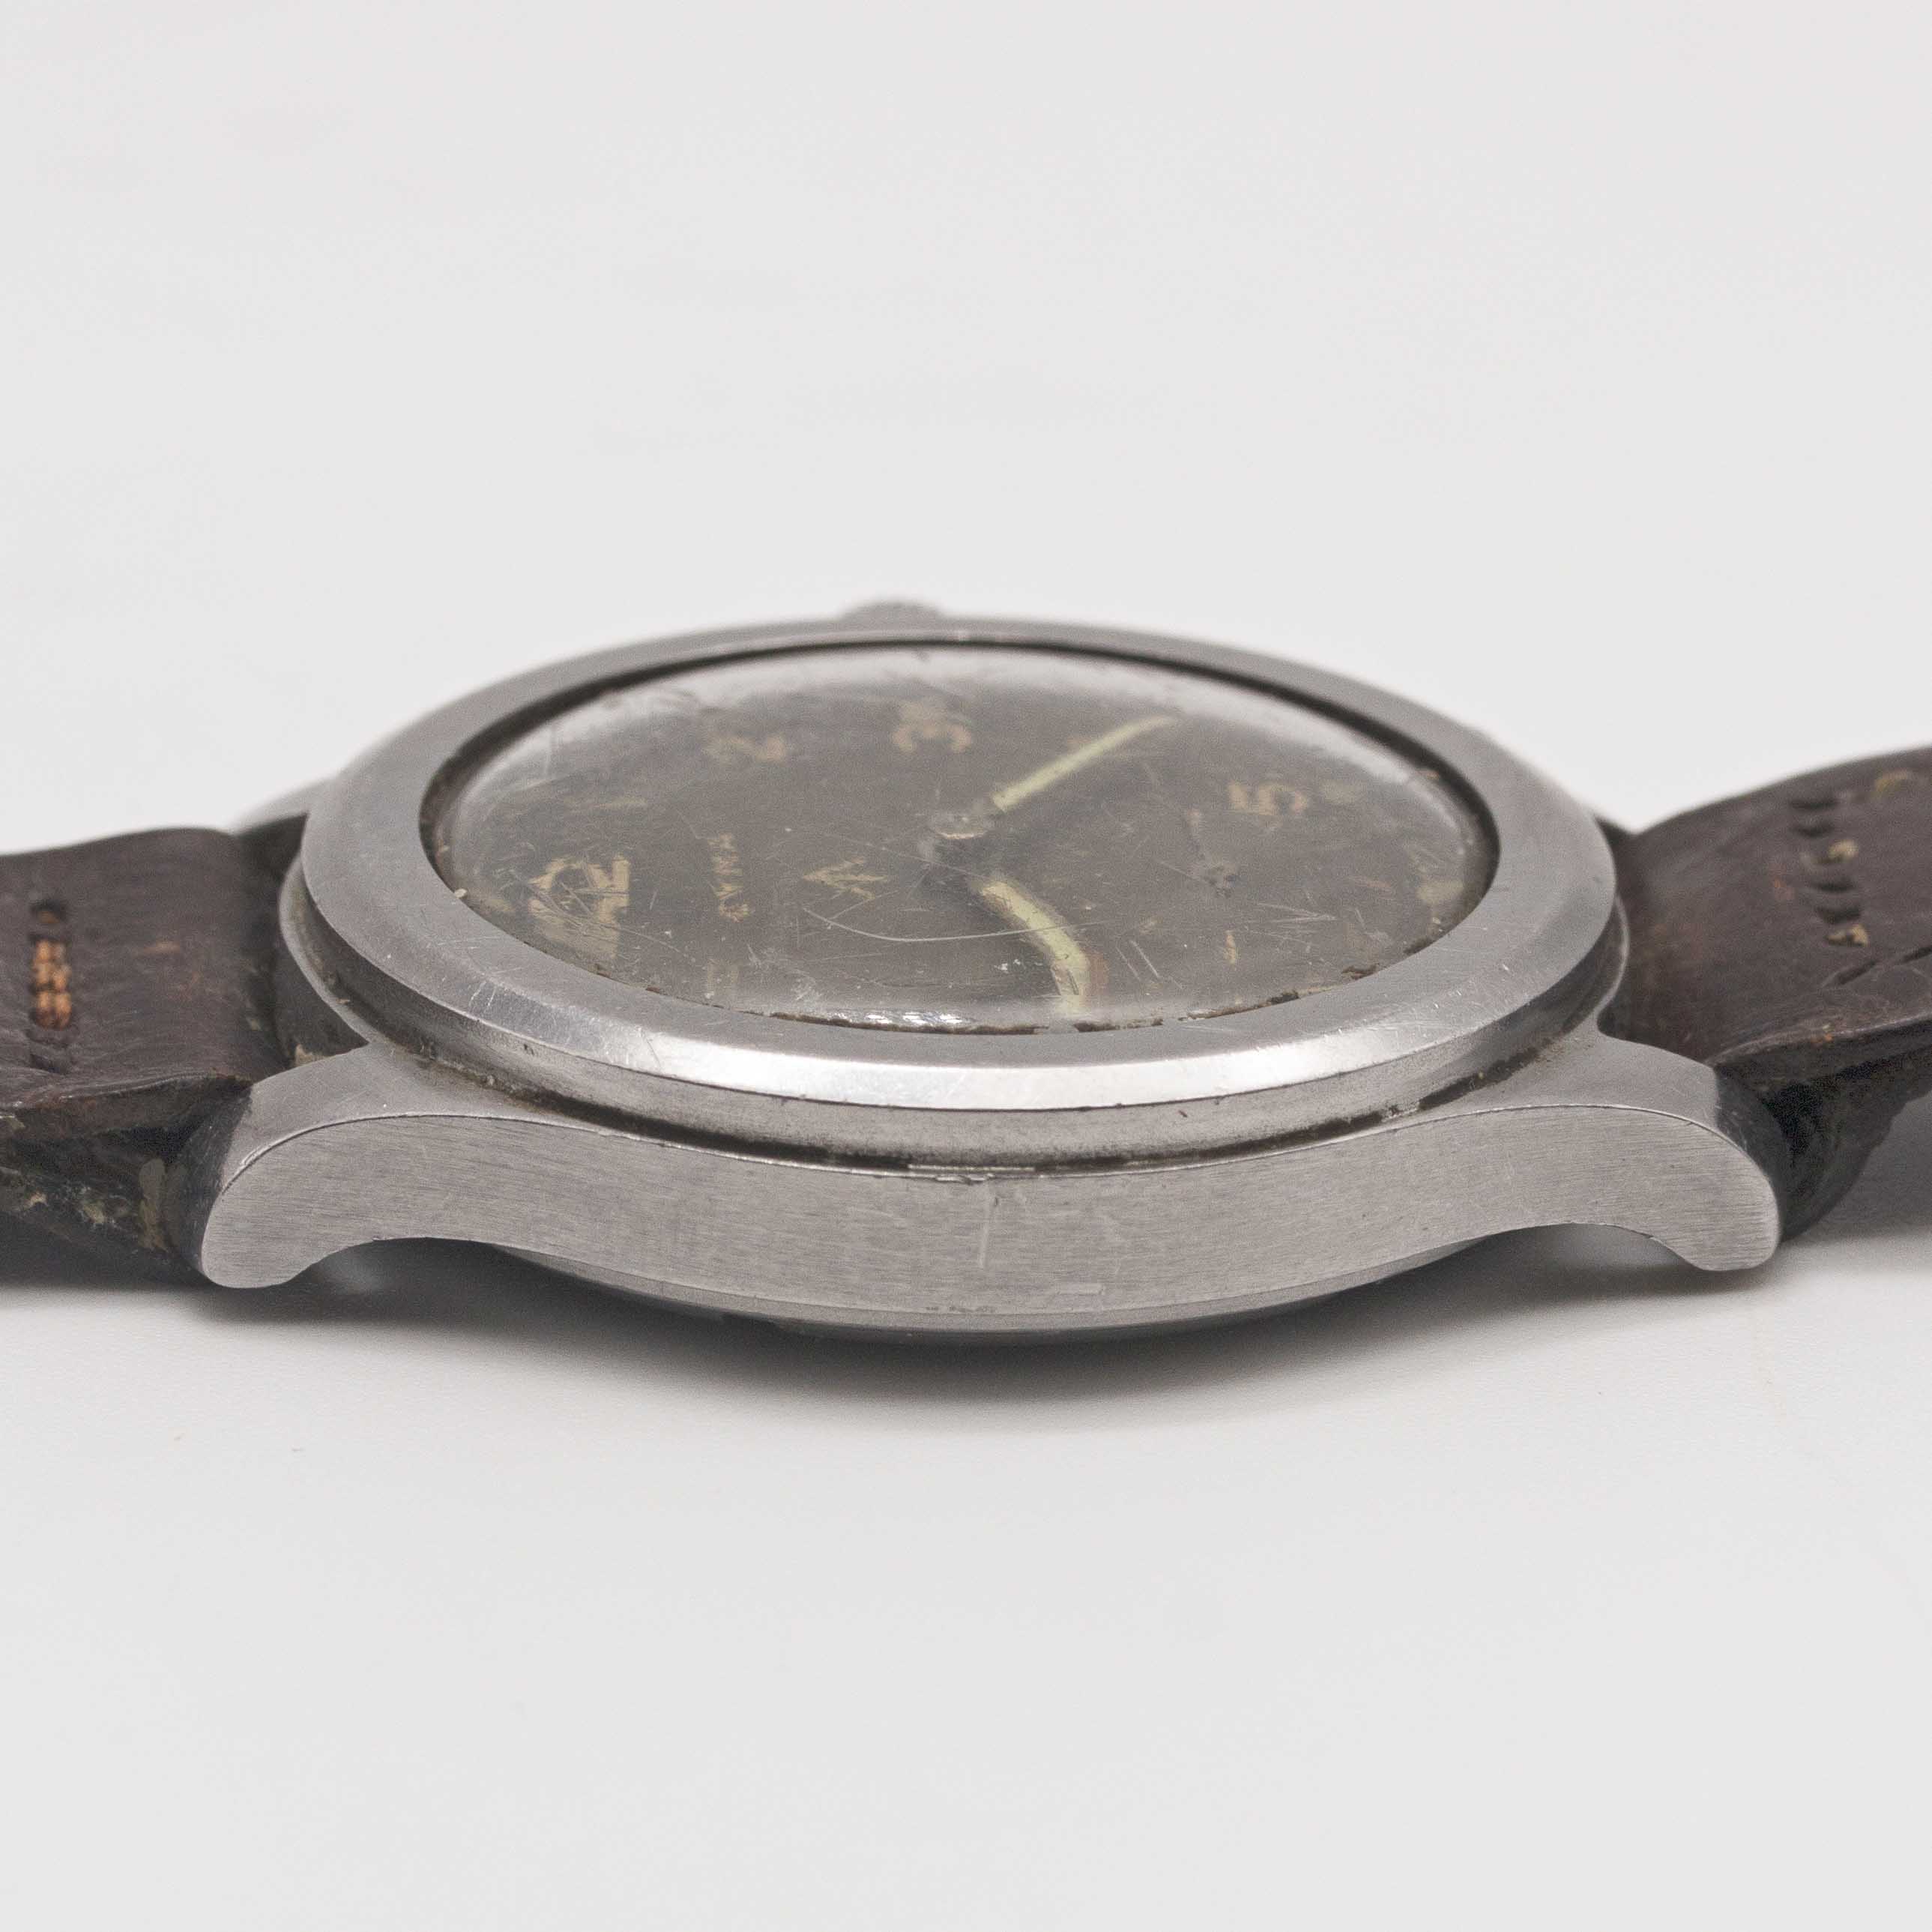 A GENTLEMAN'S STAINLESS STEEL BRITISH MILITARY CYMA W.W.W. WRIST WATCH CIRCA 1945, PART OF THE " - Image 8 of 9